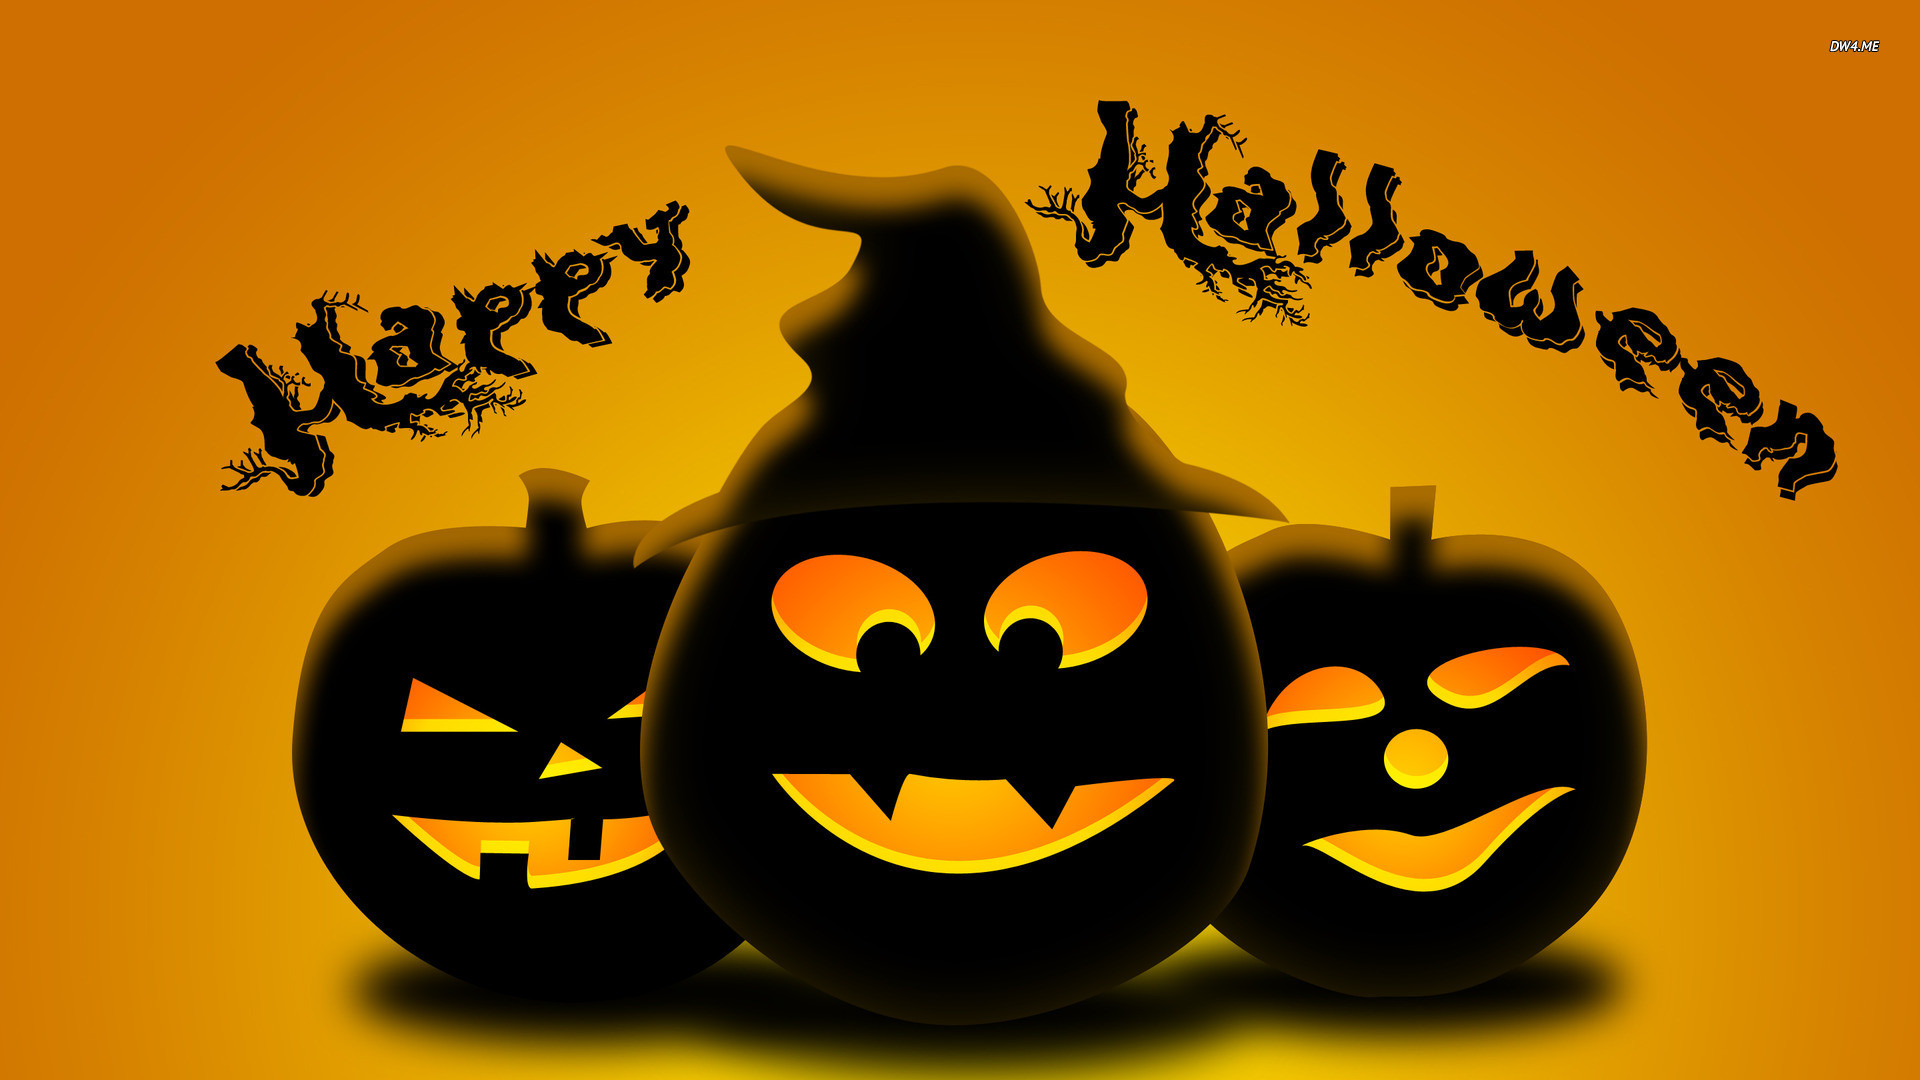 1920x1080 cute halloween picture, cool picture, images of cute halloween, cool image  of cute